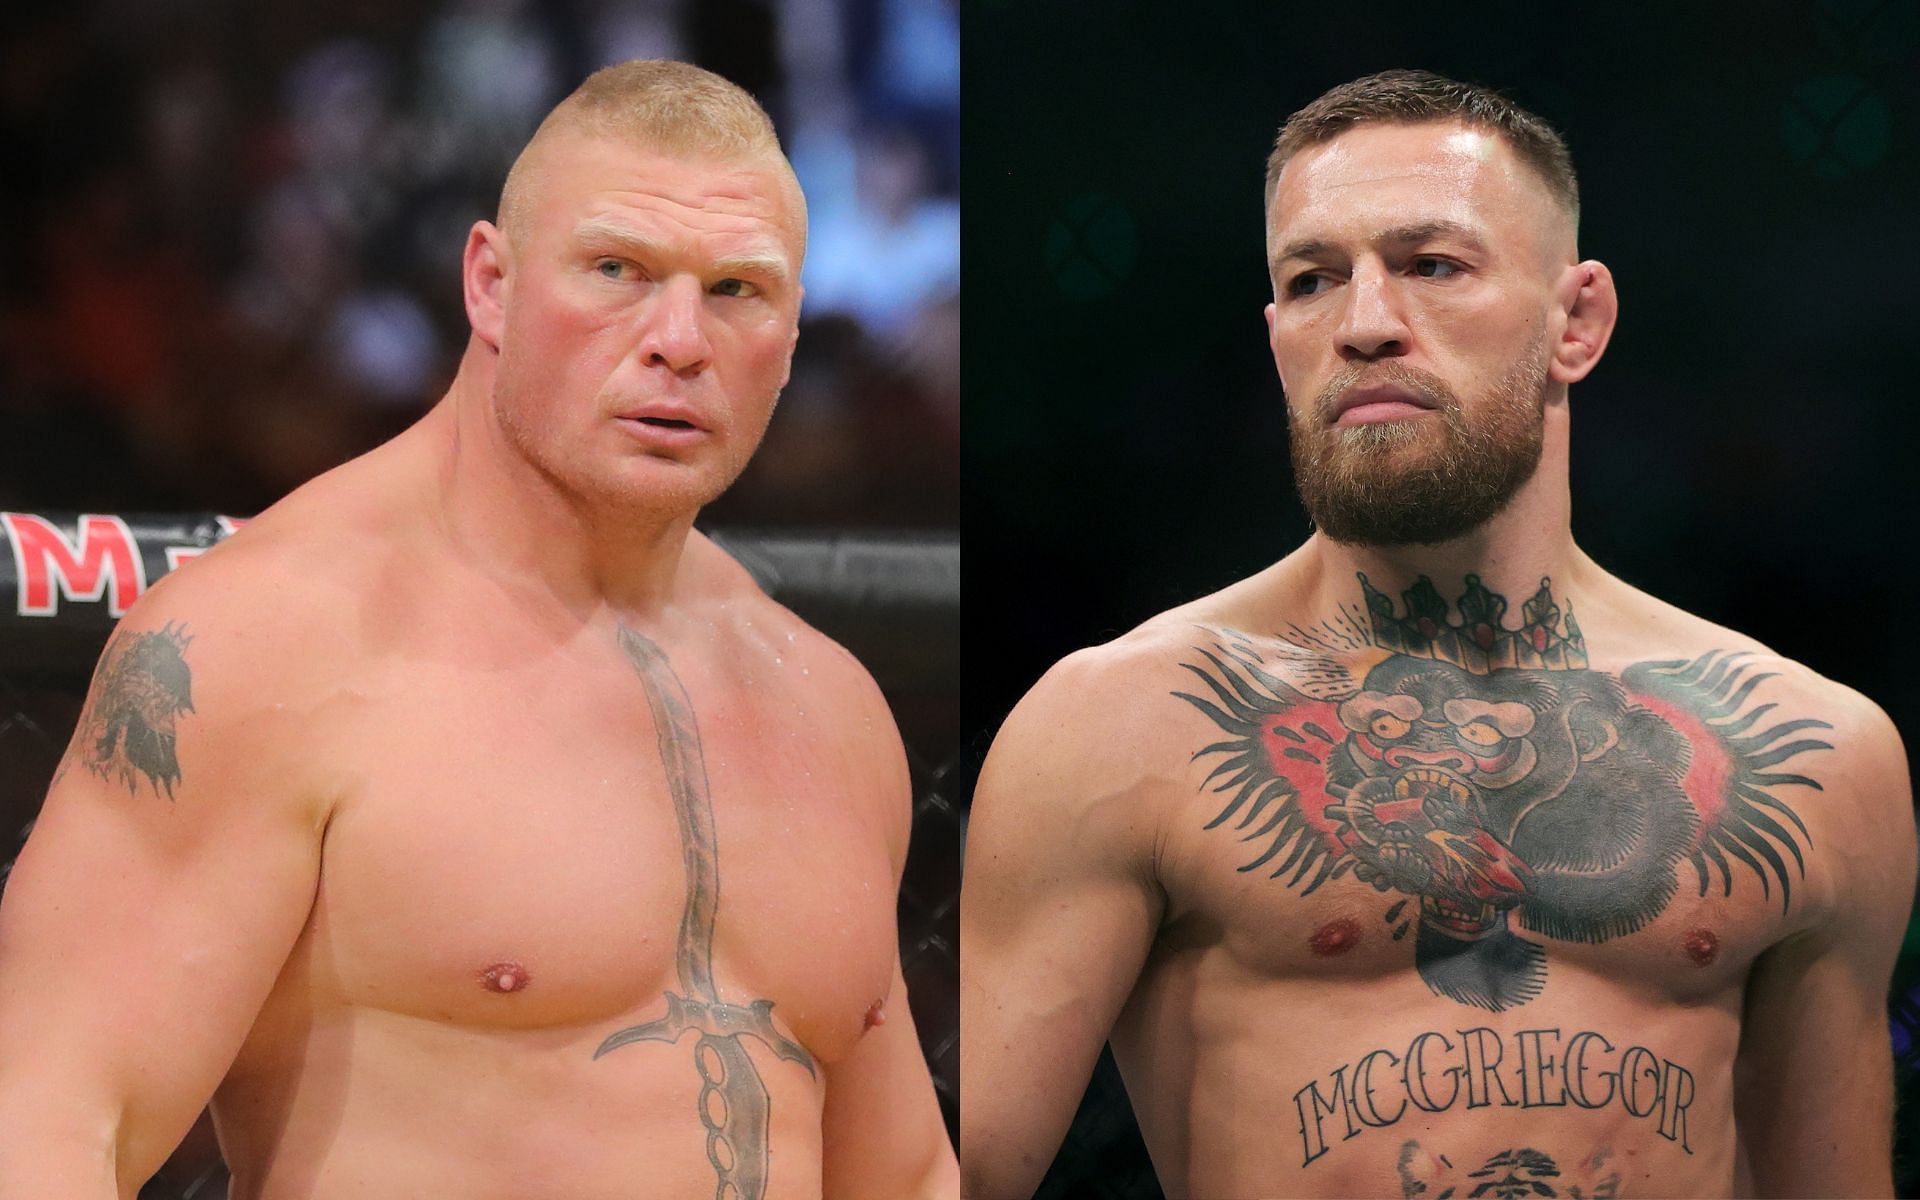 Brock Lesnar (left) and Conor McGregor (right). [via Getty Images]